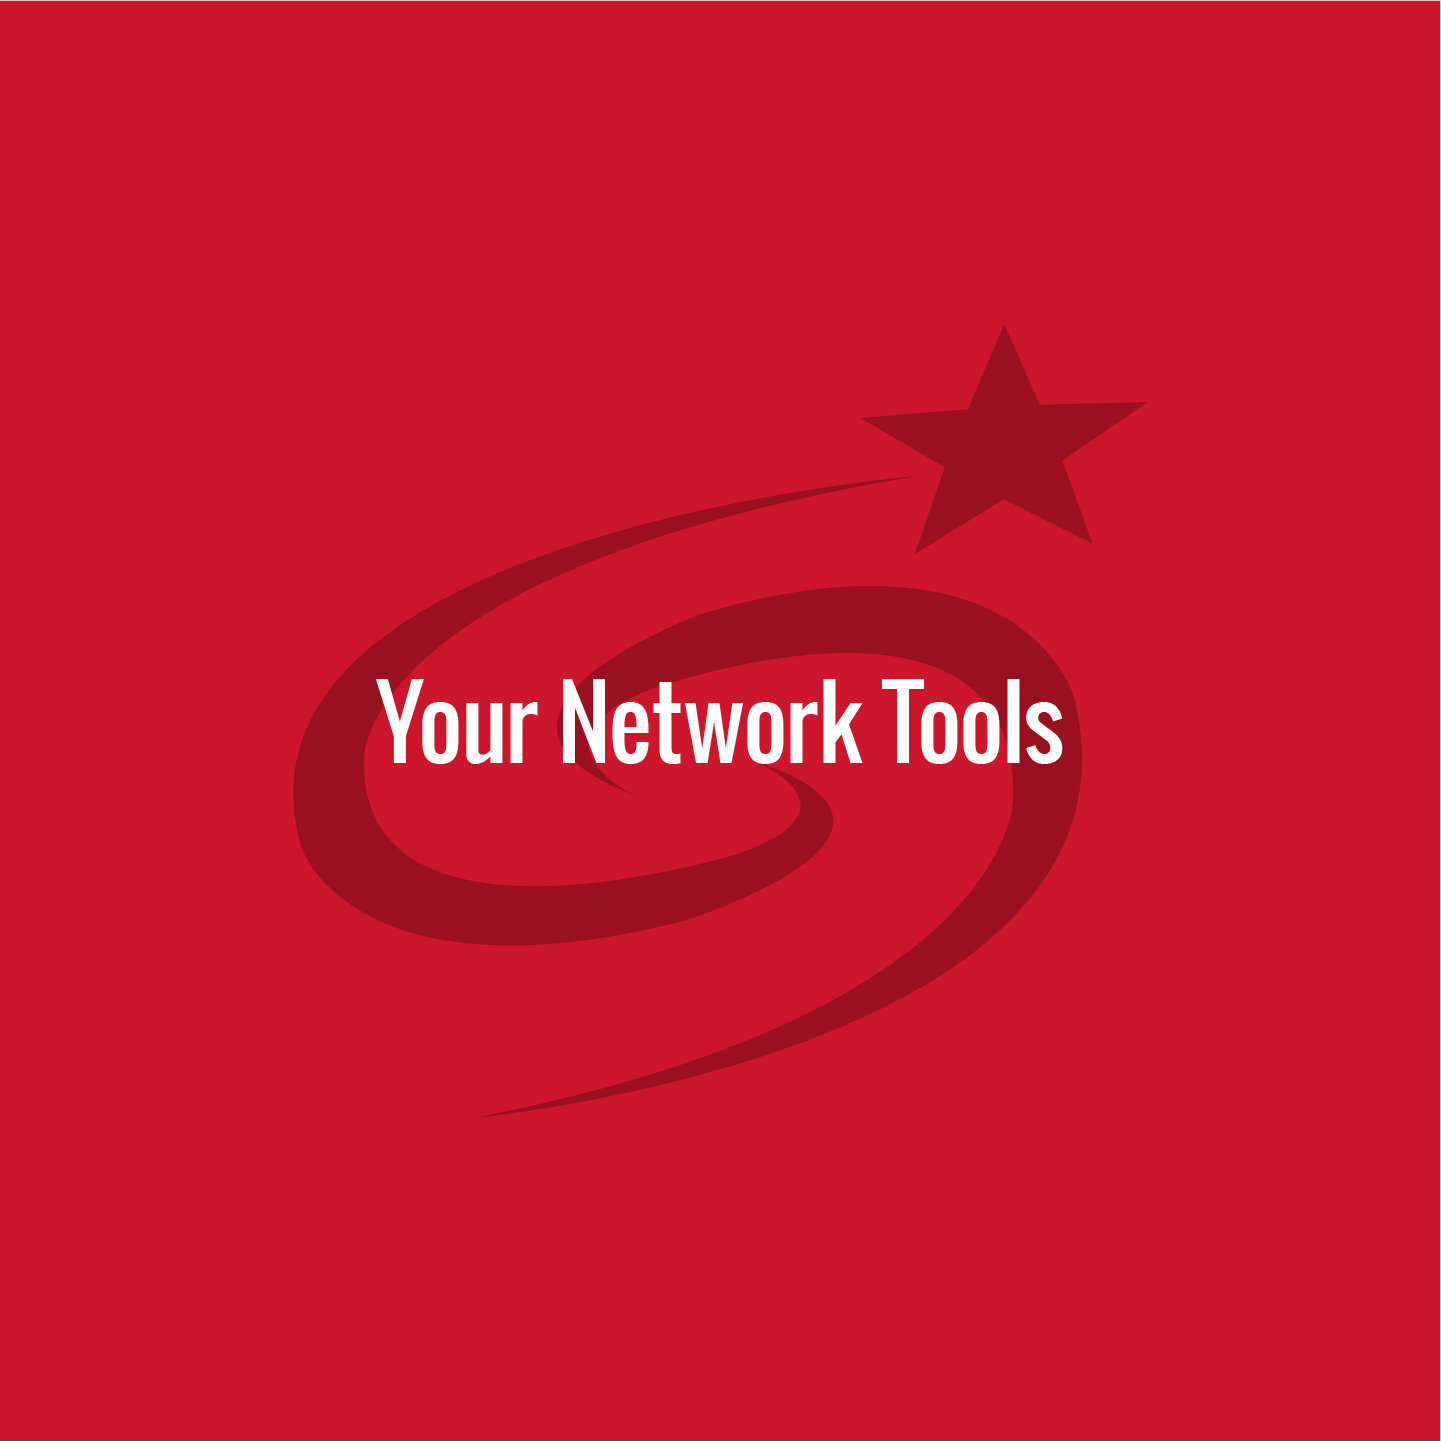 Module 6 – Your Network Tools